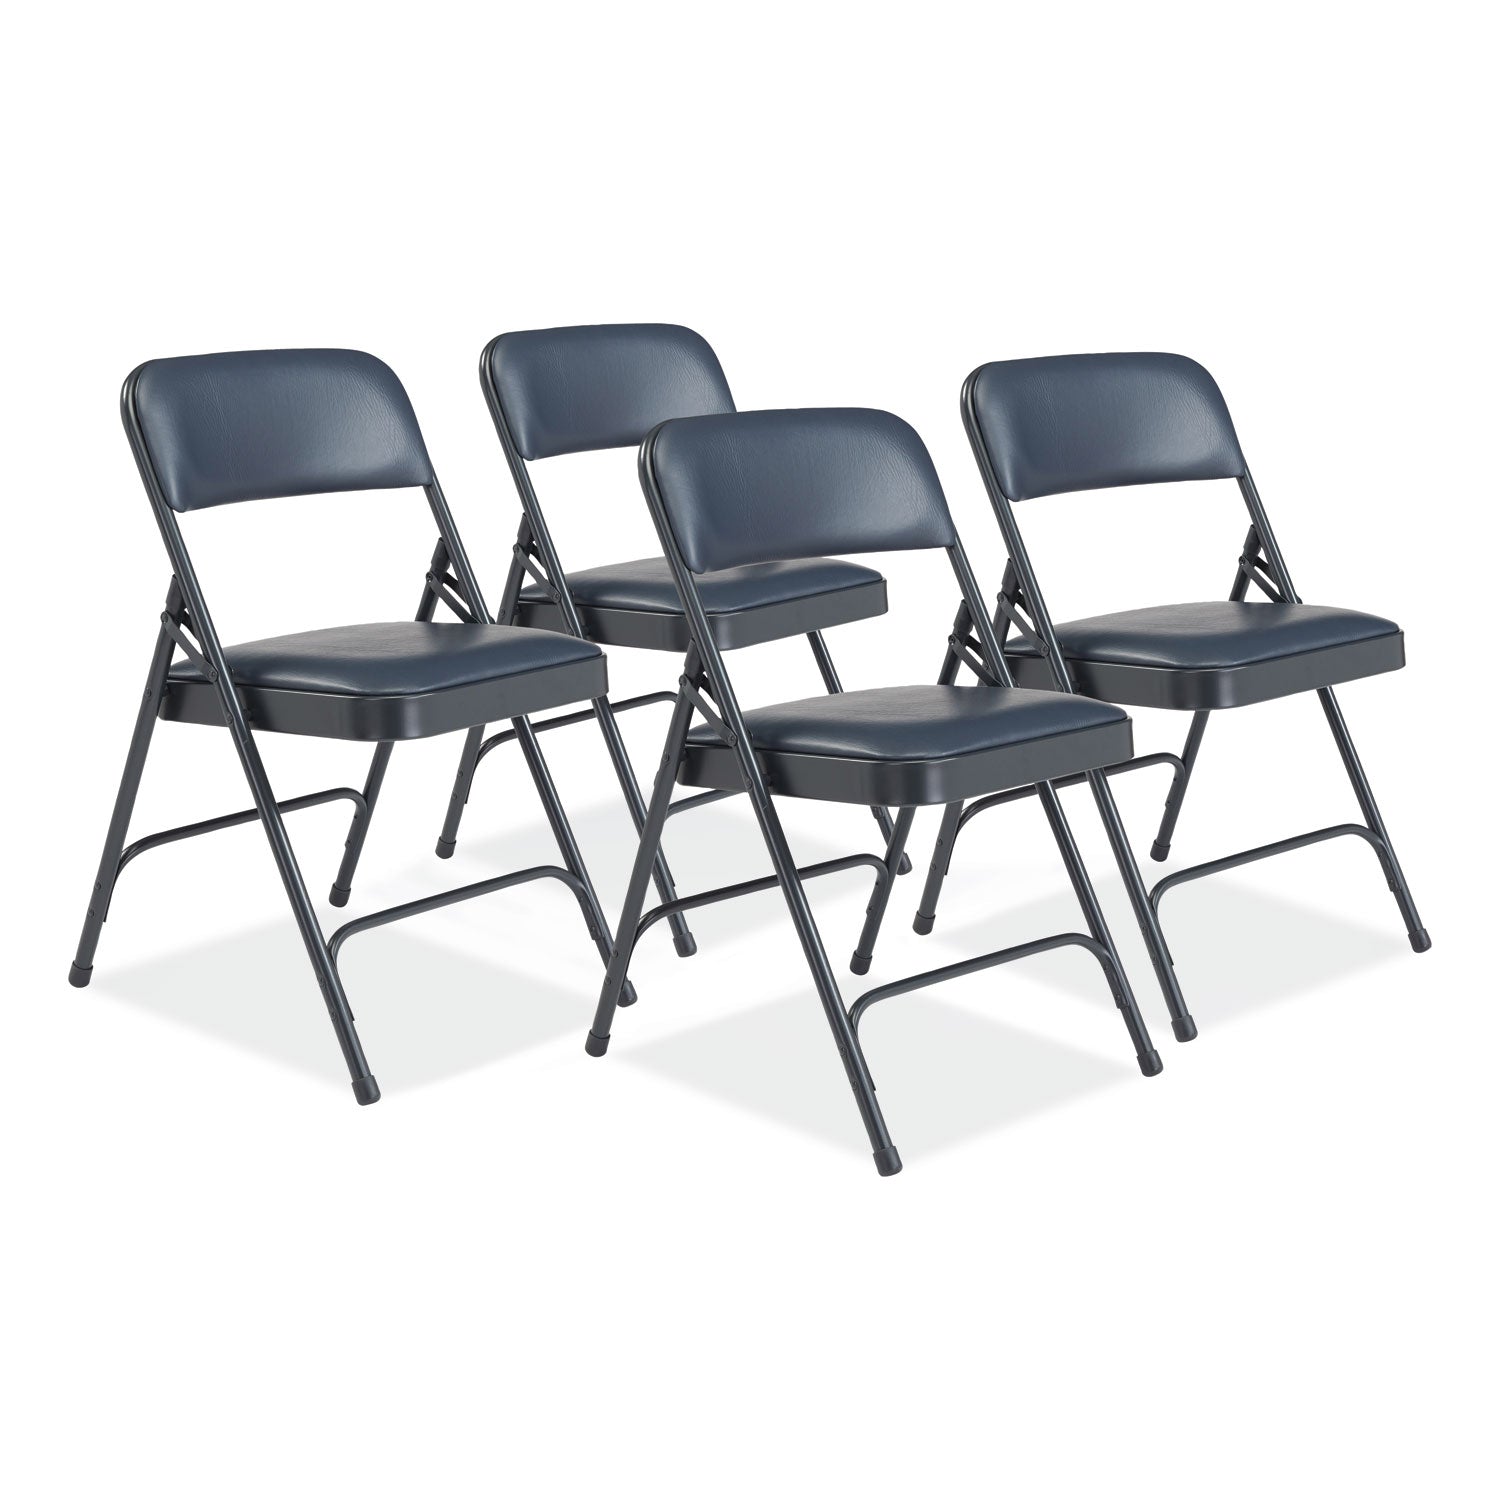 1200-series-vinyl-dual-hinge-folding-chair-supports-500-lb-1775-seat-ht-dark-midnight-blue-4-ct-ships-in-1-3-bus-days_nps1204 - 1